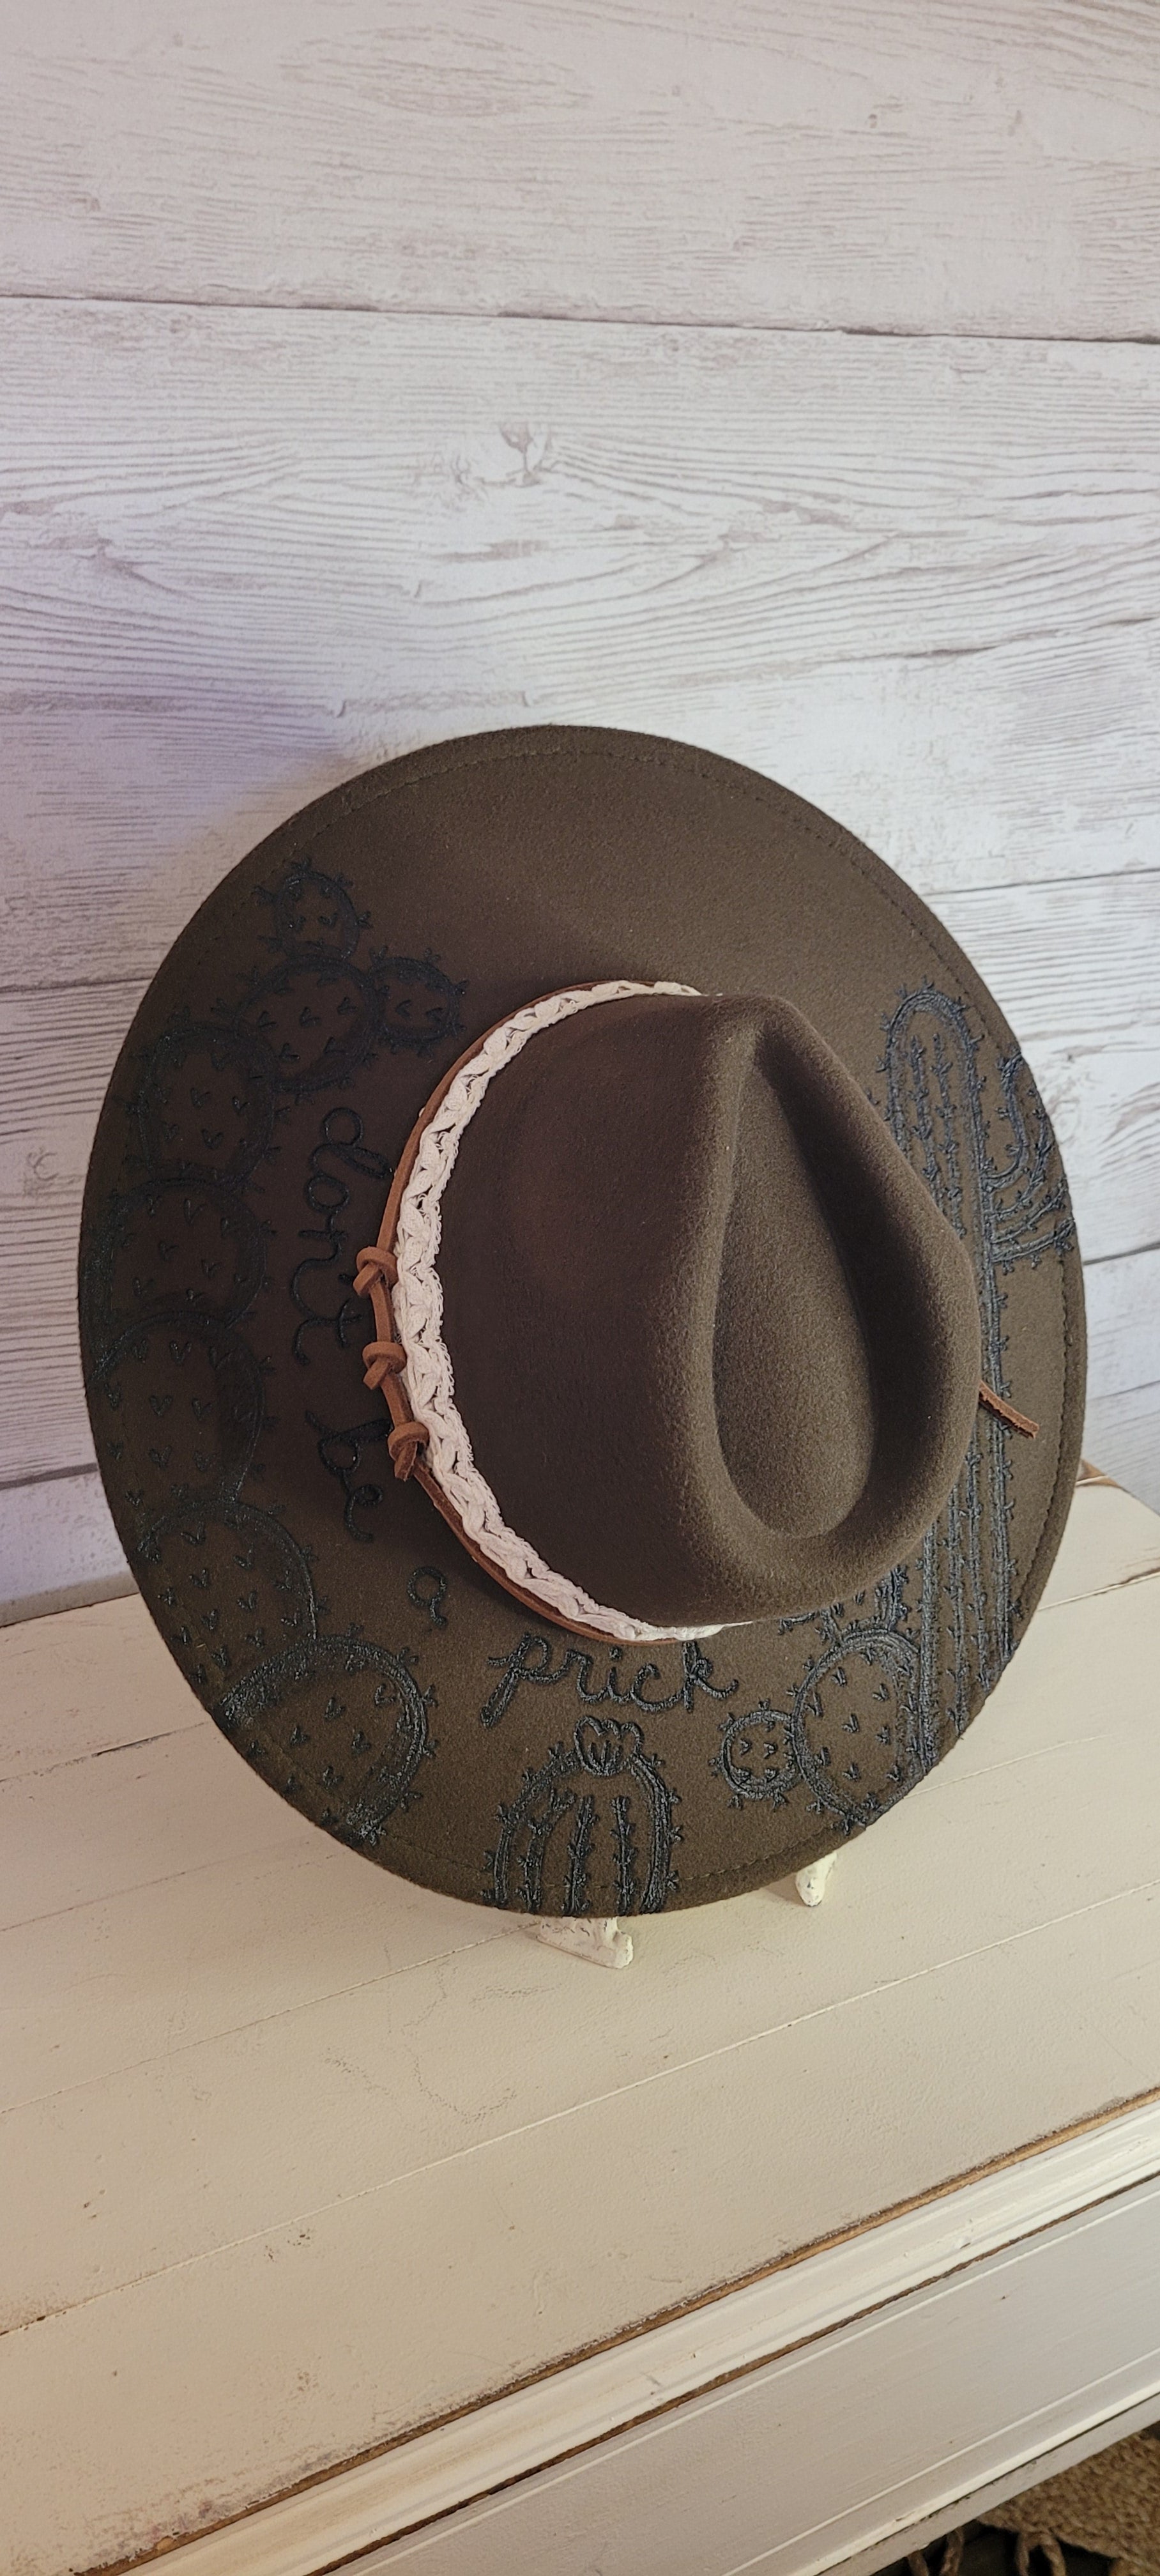 Features "don't be a prick", cactus & saguaro engraving Natural lace ribbon & leather band Felt hat Flat brim 65% polyester and 35% cotton Ribbon drawstring for hat size adjustment Head Circumference: 24" Crown Height: 5" Brim Length: 15.75" Brim Width: 14.5" Branded & numbered inside crown Custom designed by Kayla